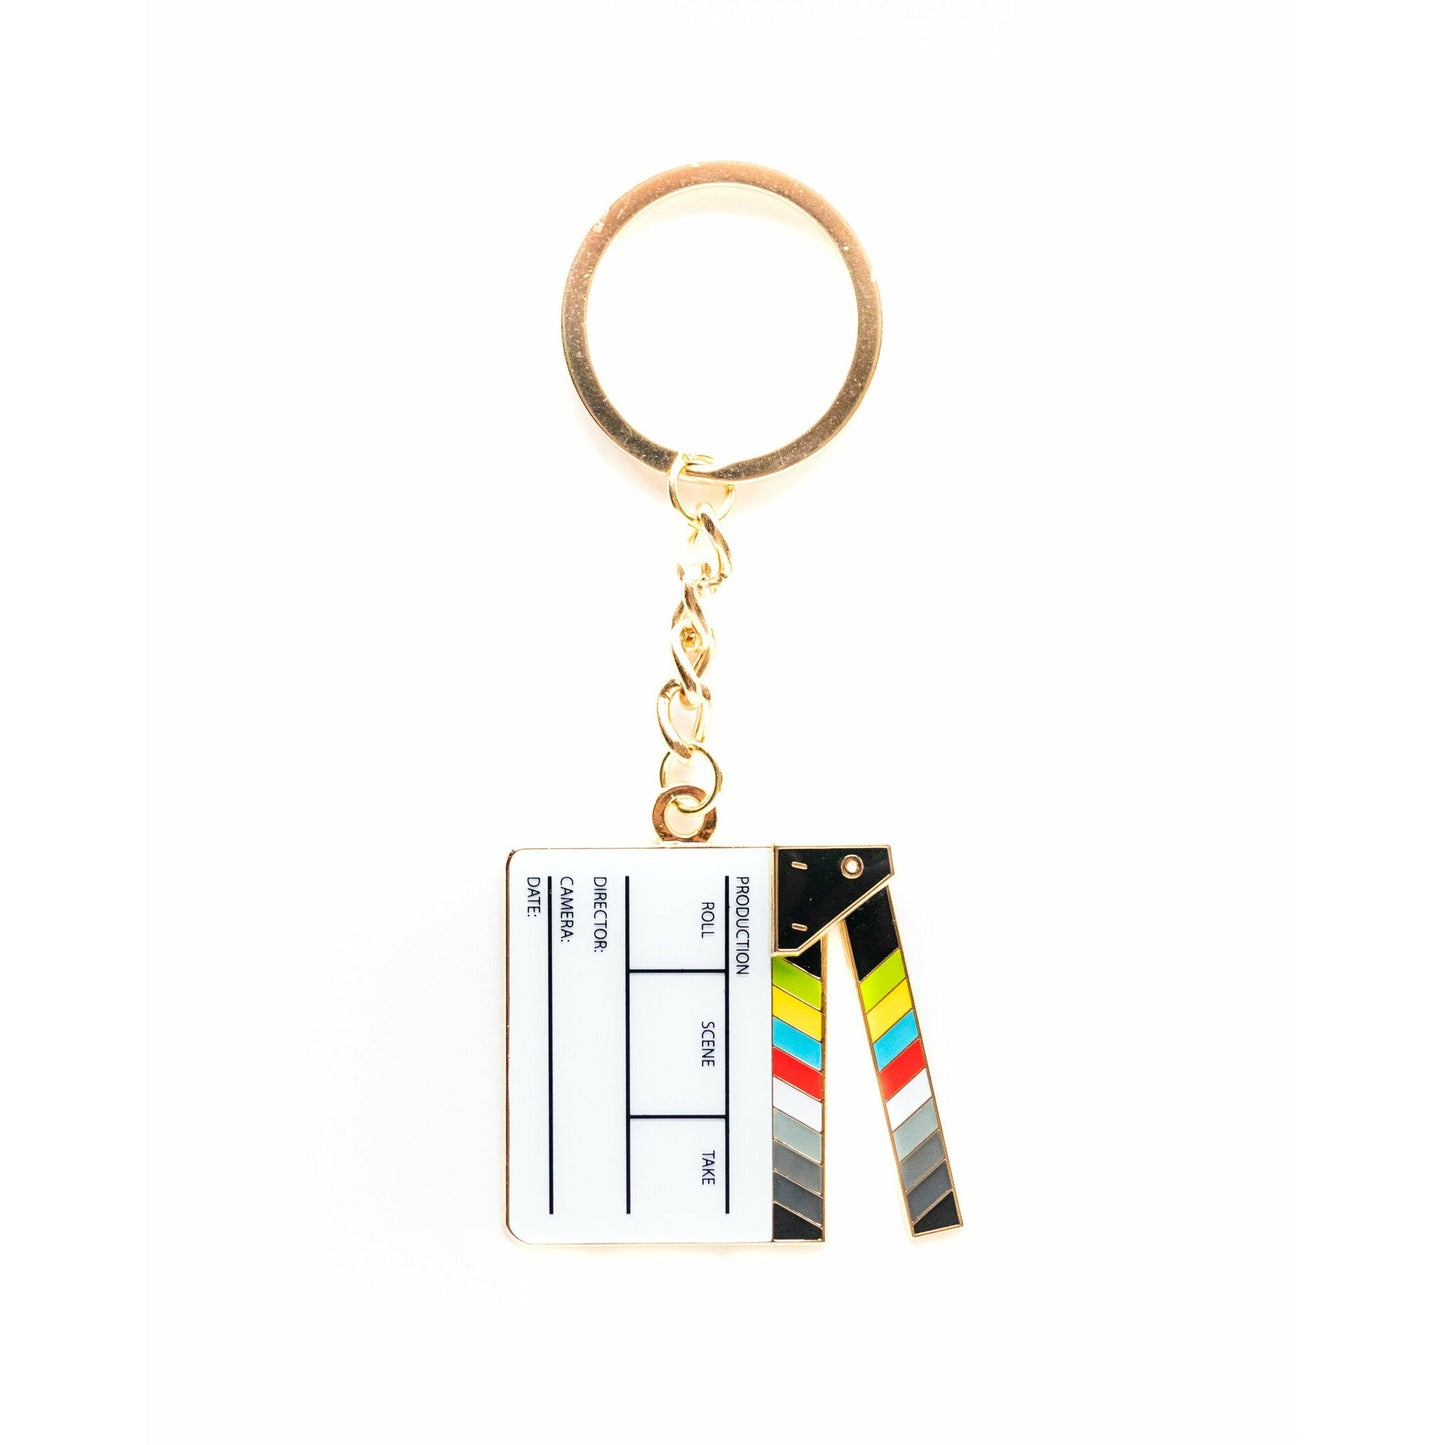 Film slate keychain that is movable